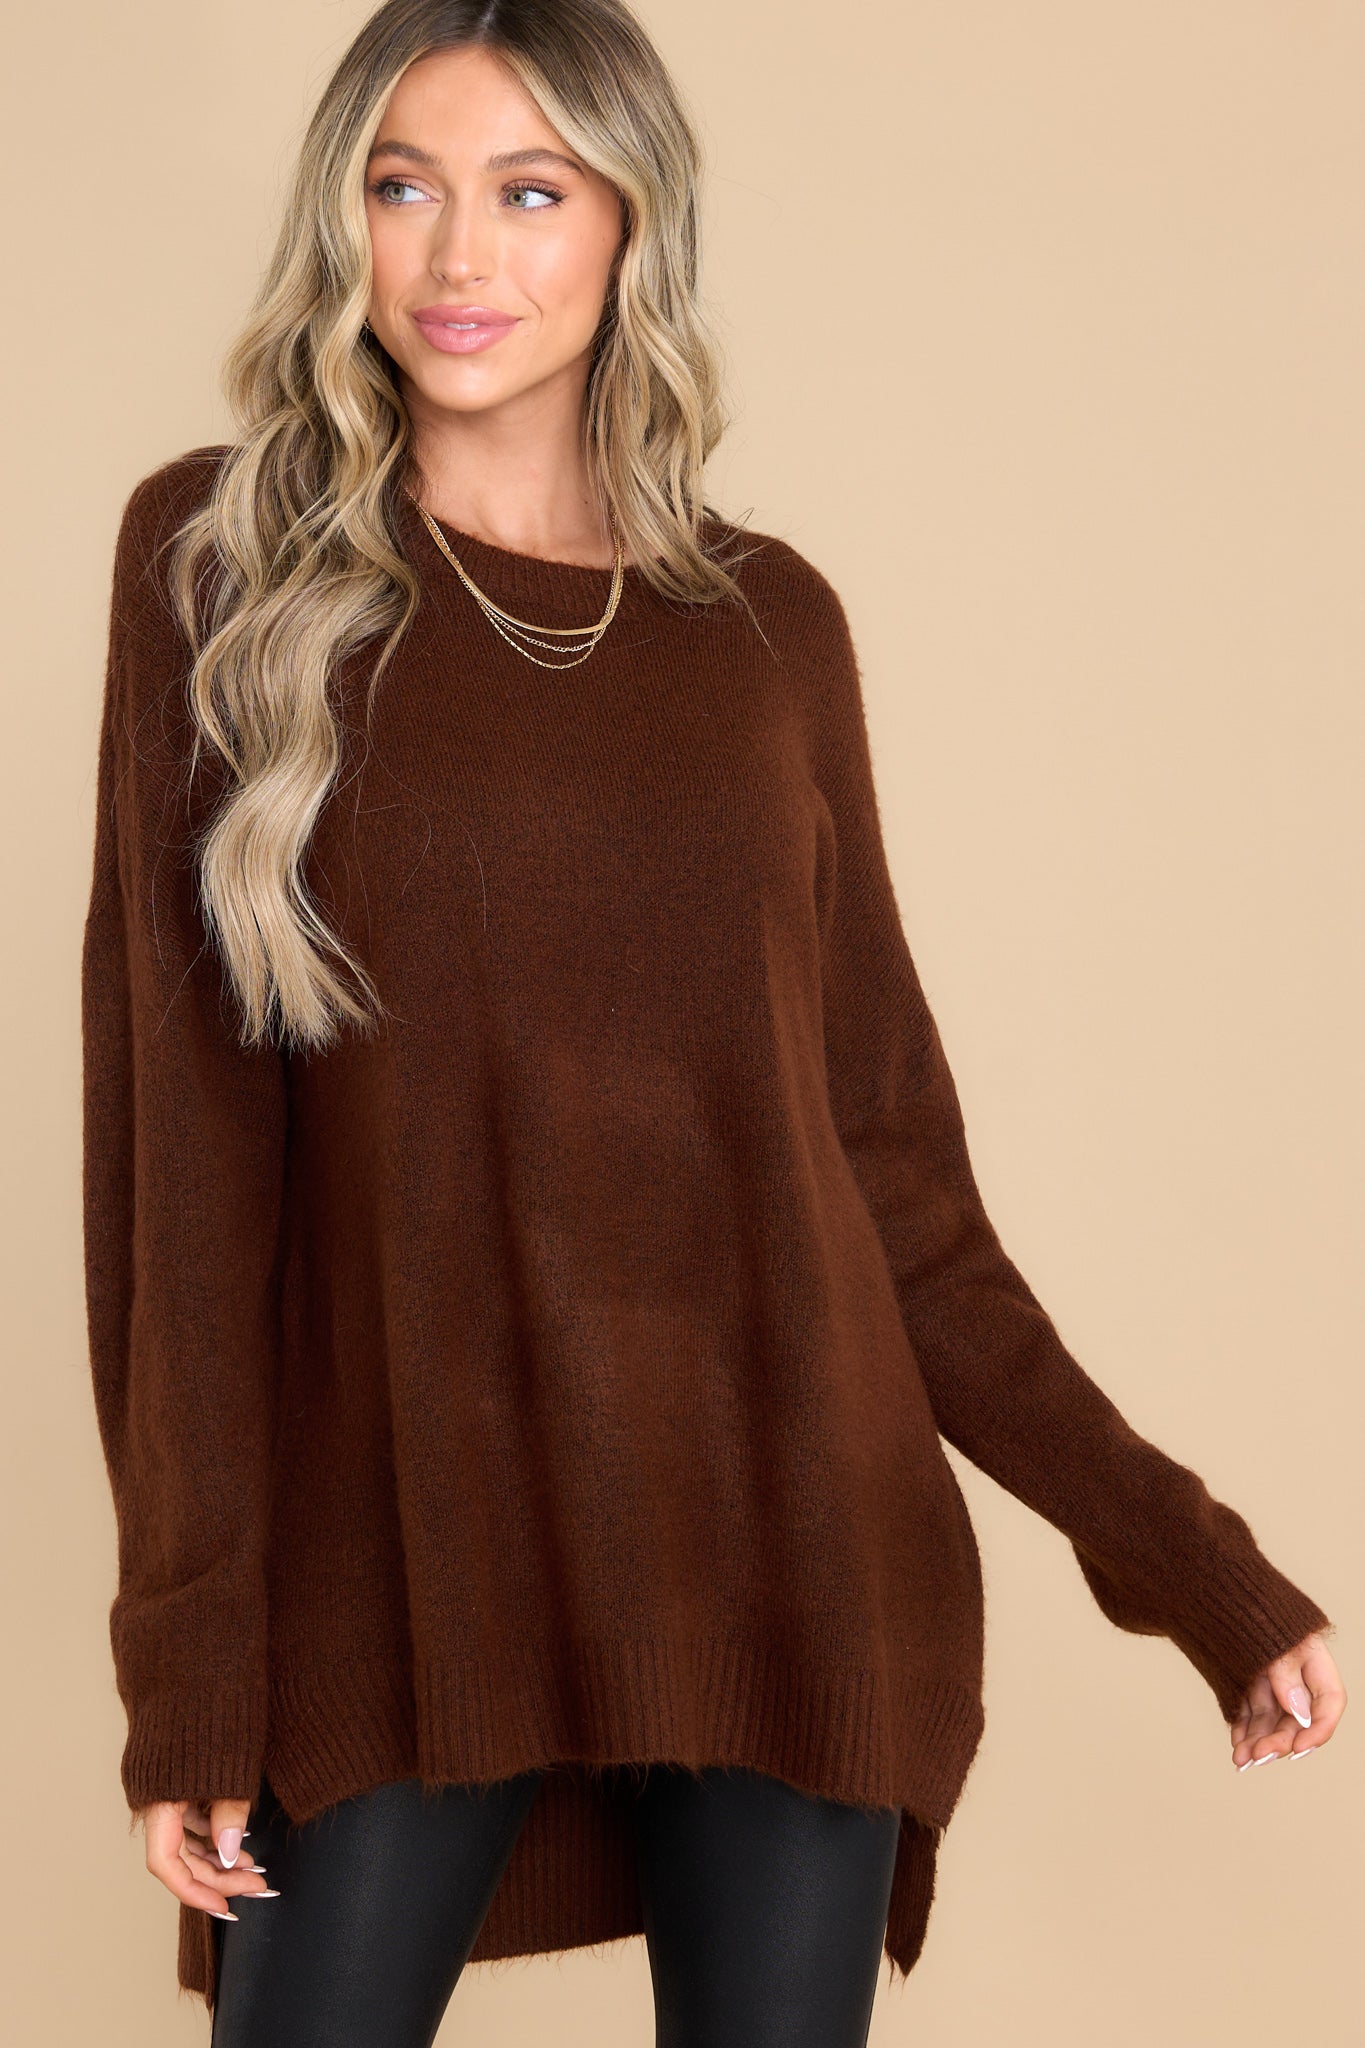 Meant To Be Together Chocolate Sweater - Red Dress